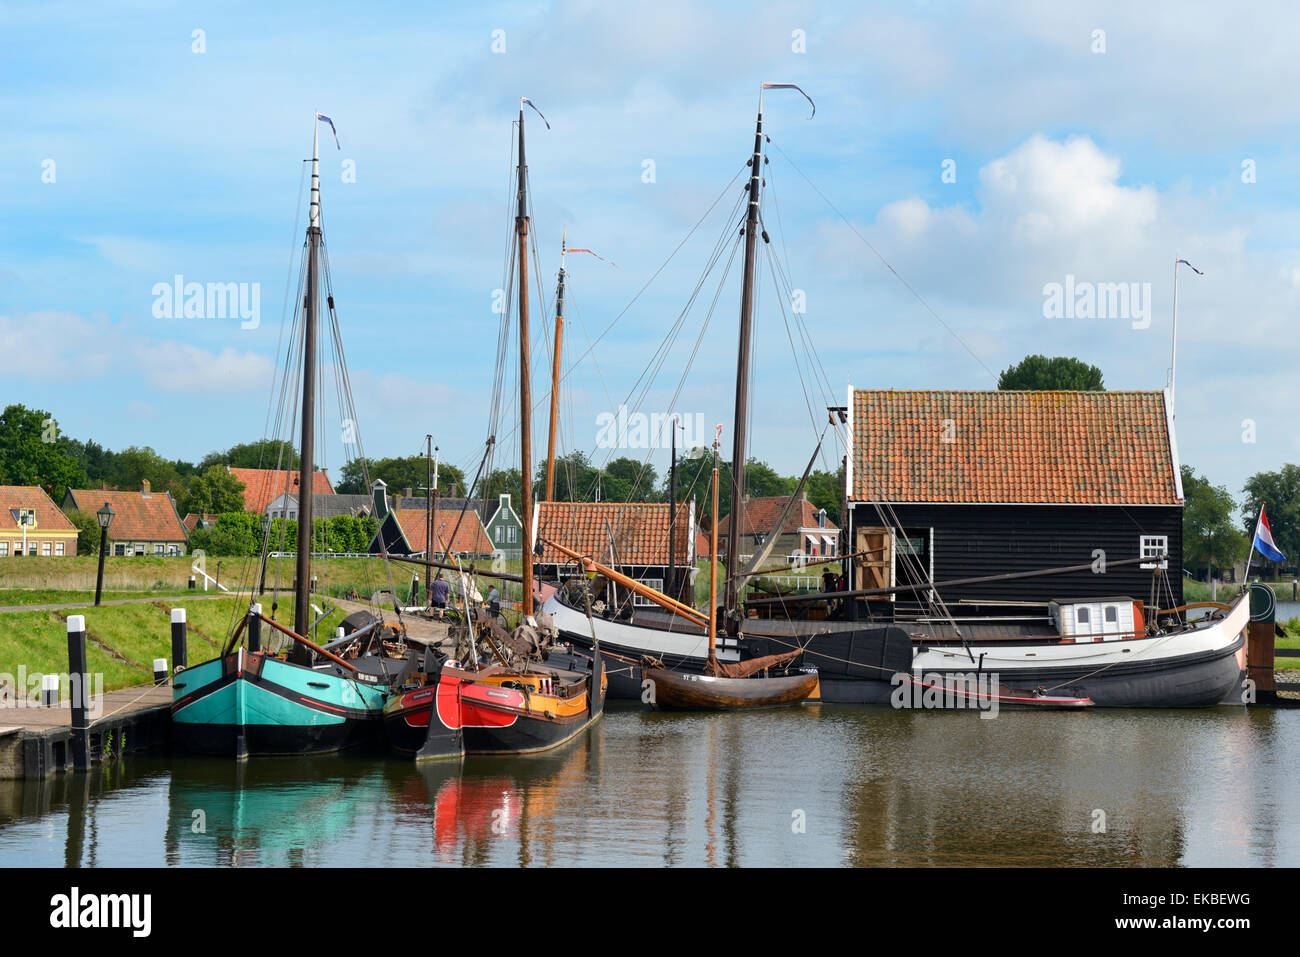 Boats in a fishing port at Zuiderzee Open Air Museum, Lake Ijssel, Enkhuizen, North Holland, Netherlands, Europe Stock Photo